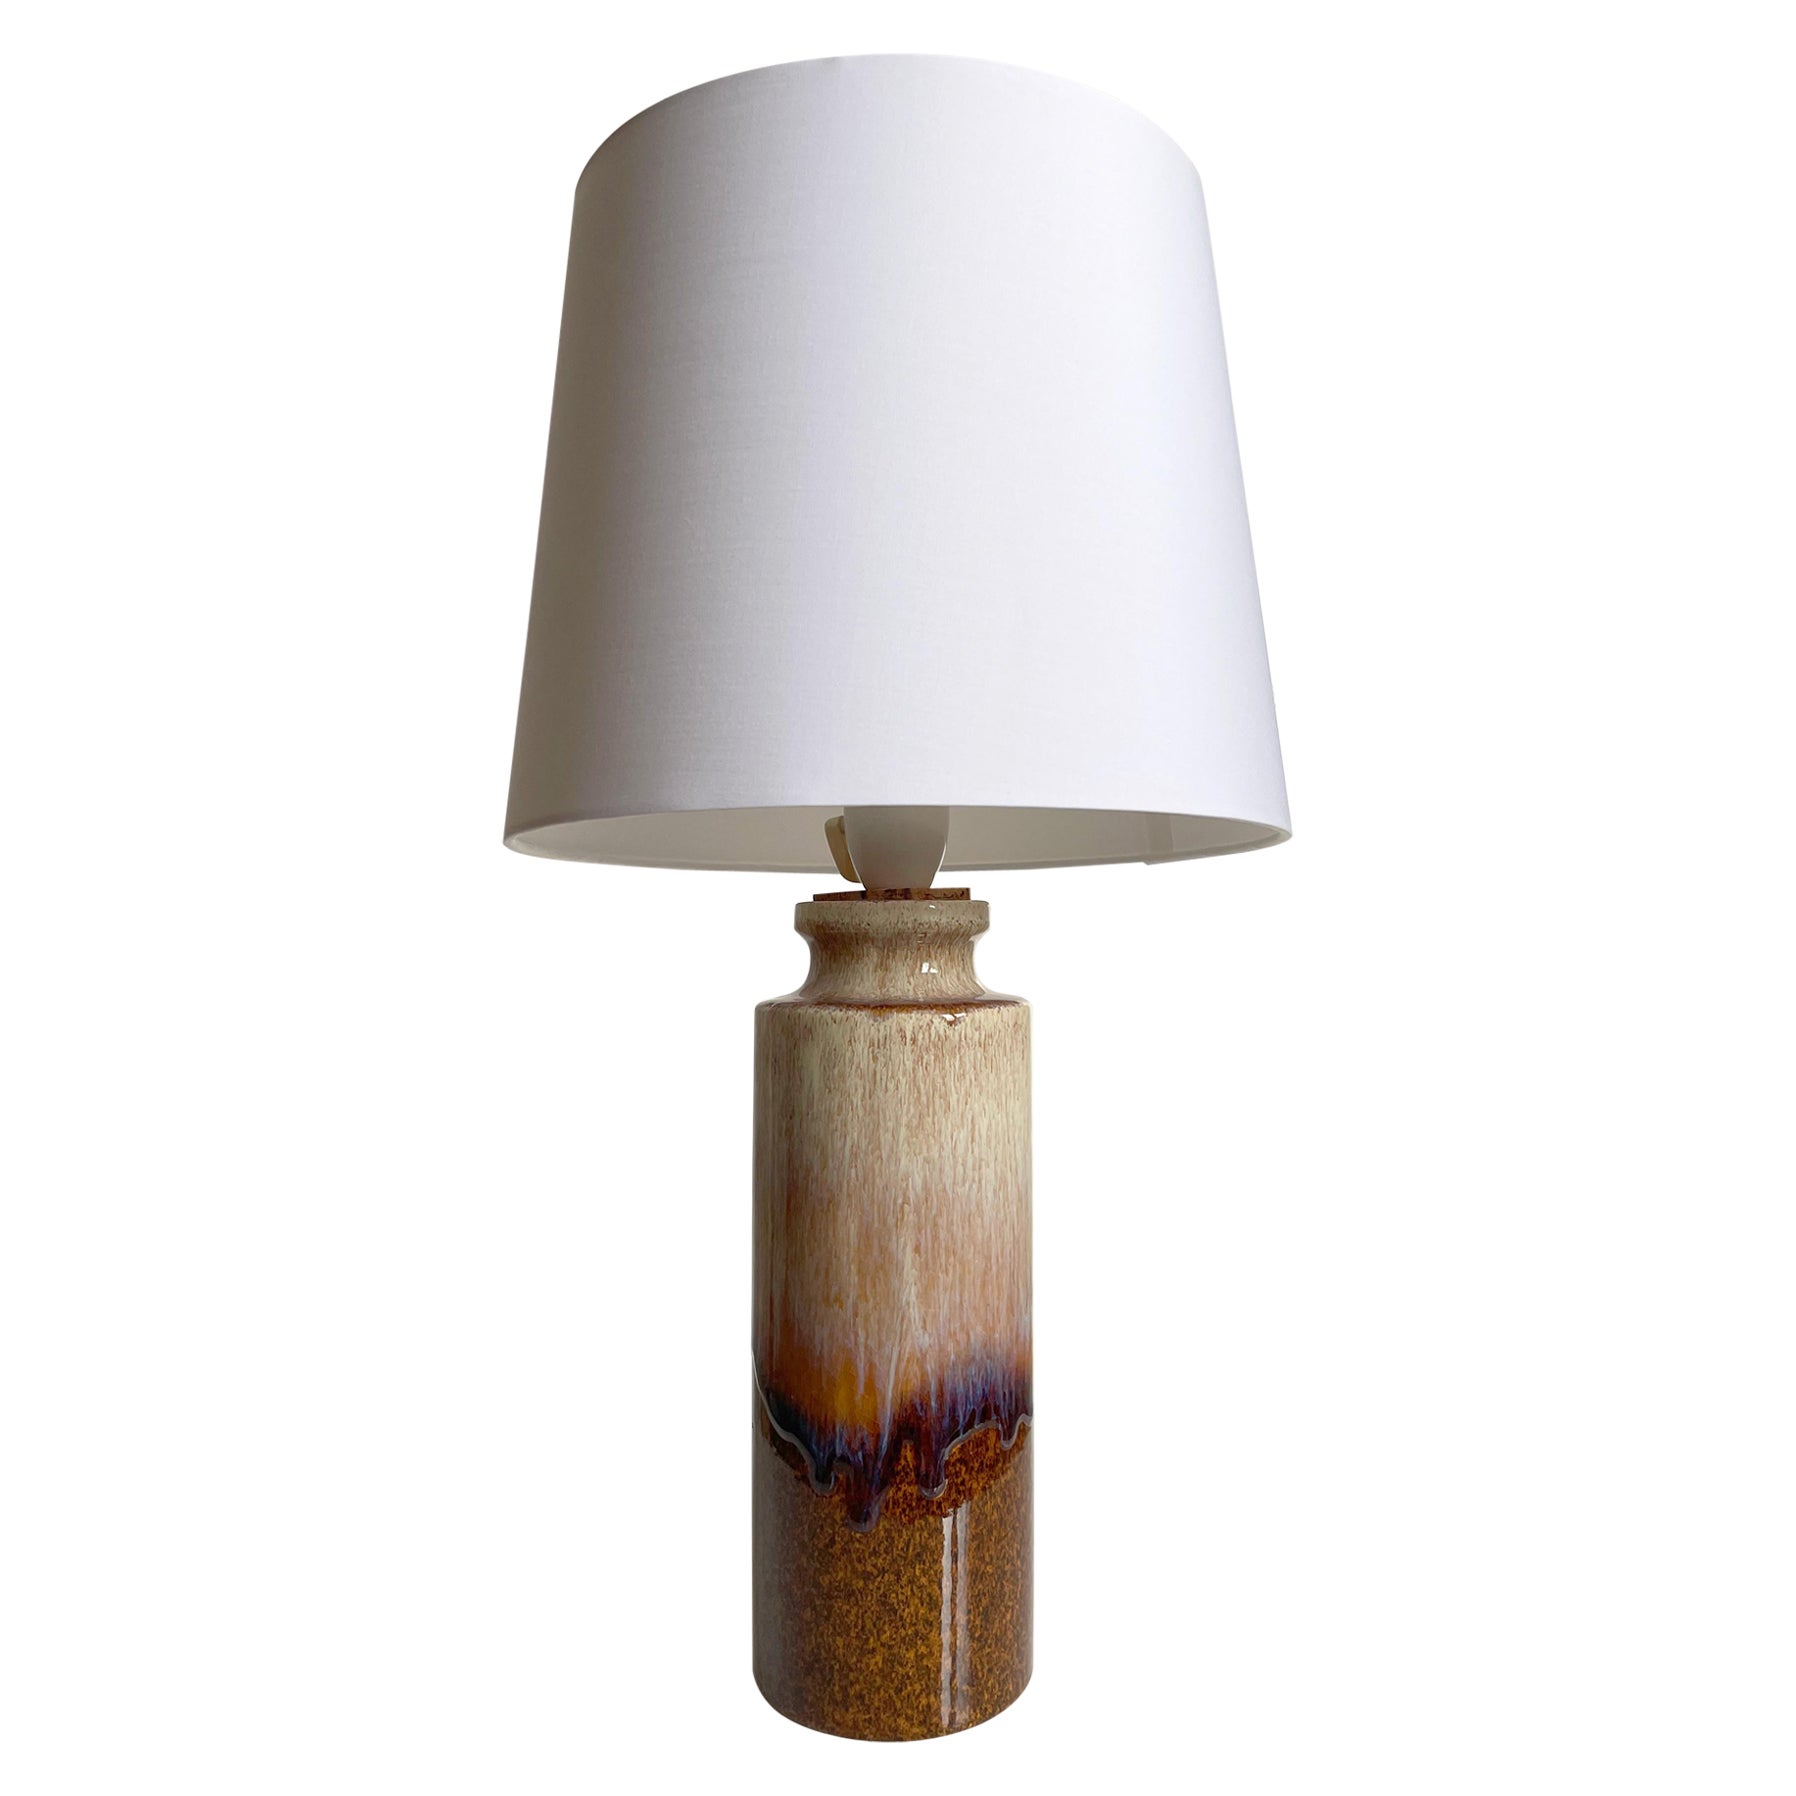 Earthcolored Running Glaze Ceramic Table Lamp, 1960s